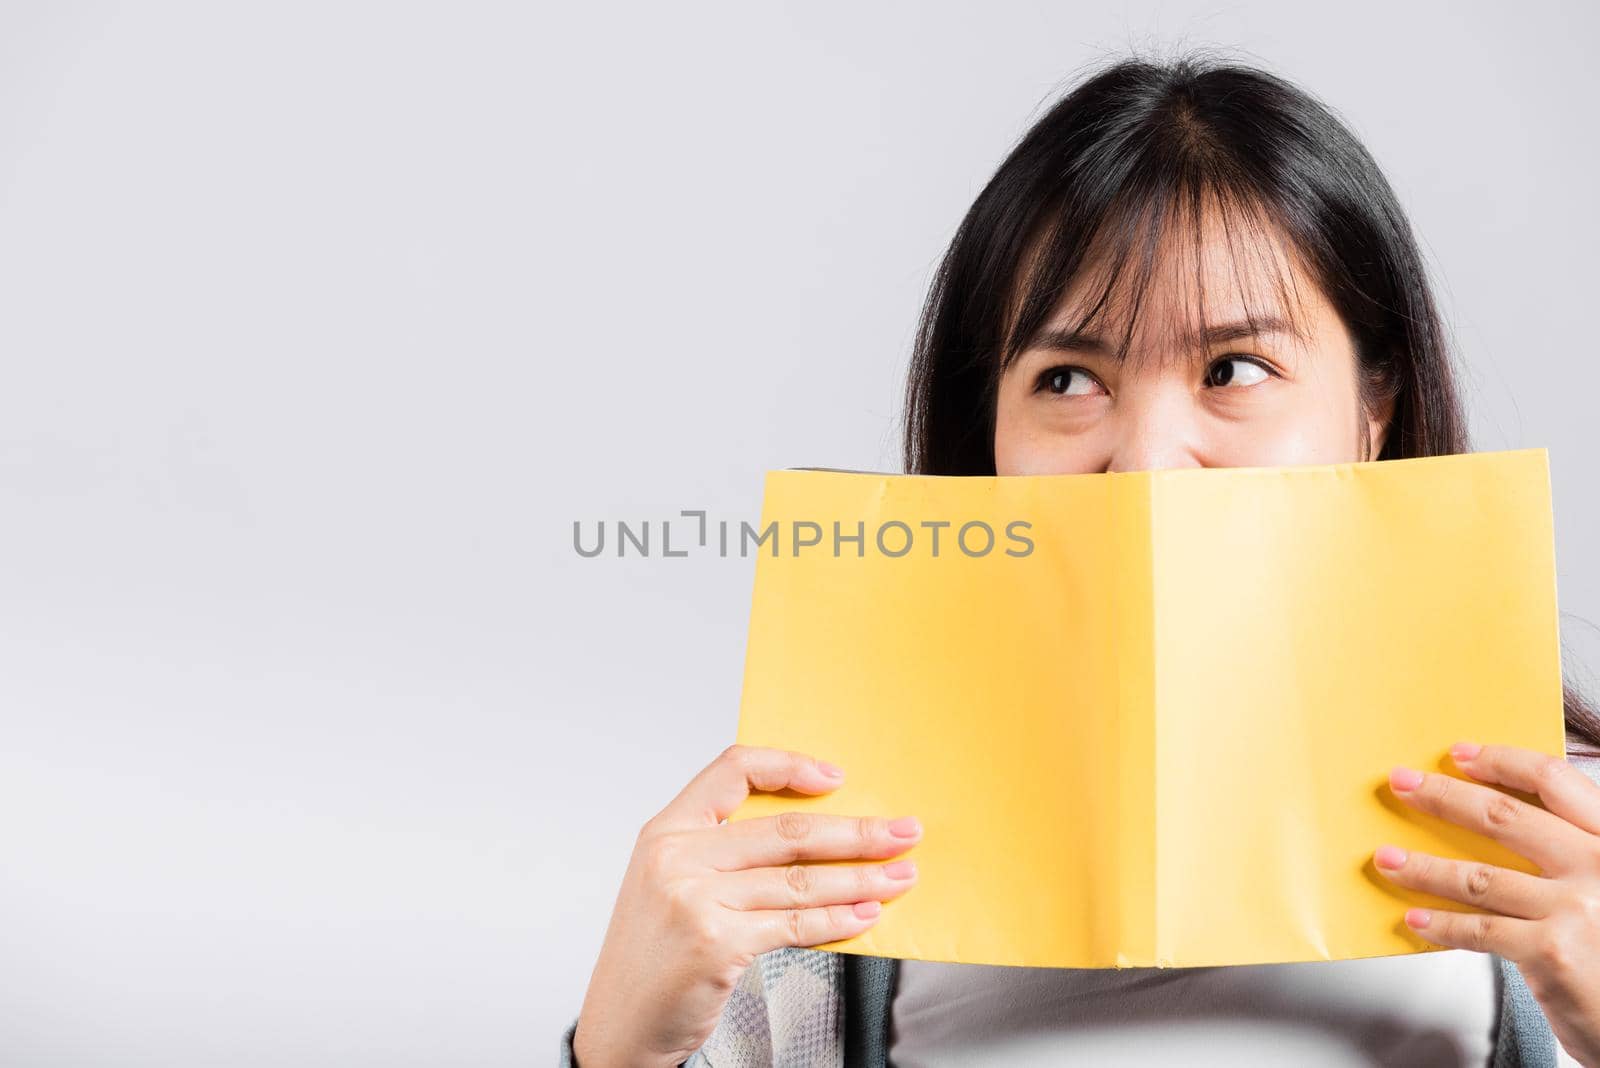 Woman teen smiling covering her face with open book, Portrait of beautiful Asian young female person hiding behind an book show only eyes studio shot isolated on white background, education concept